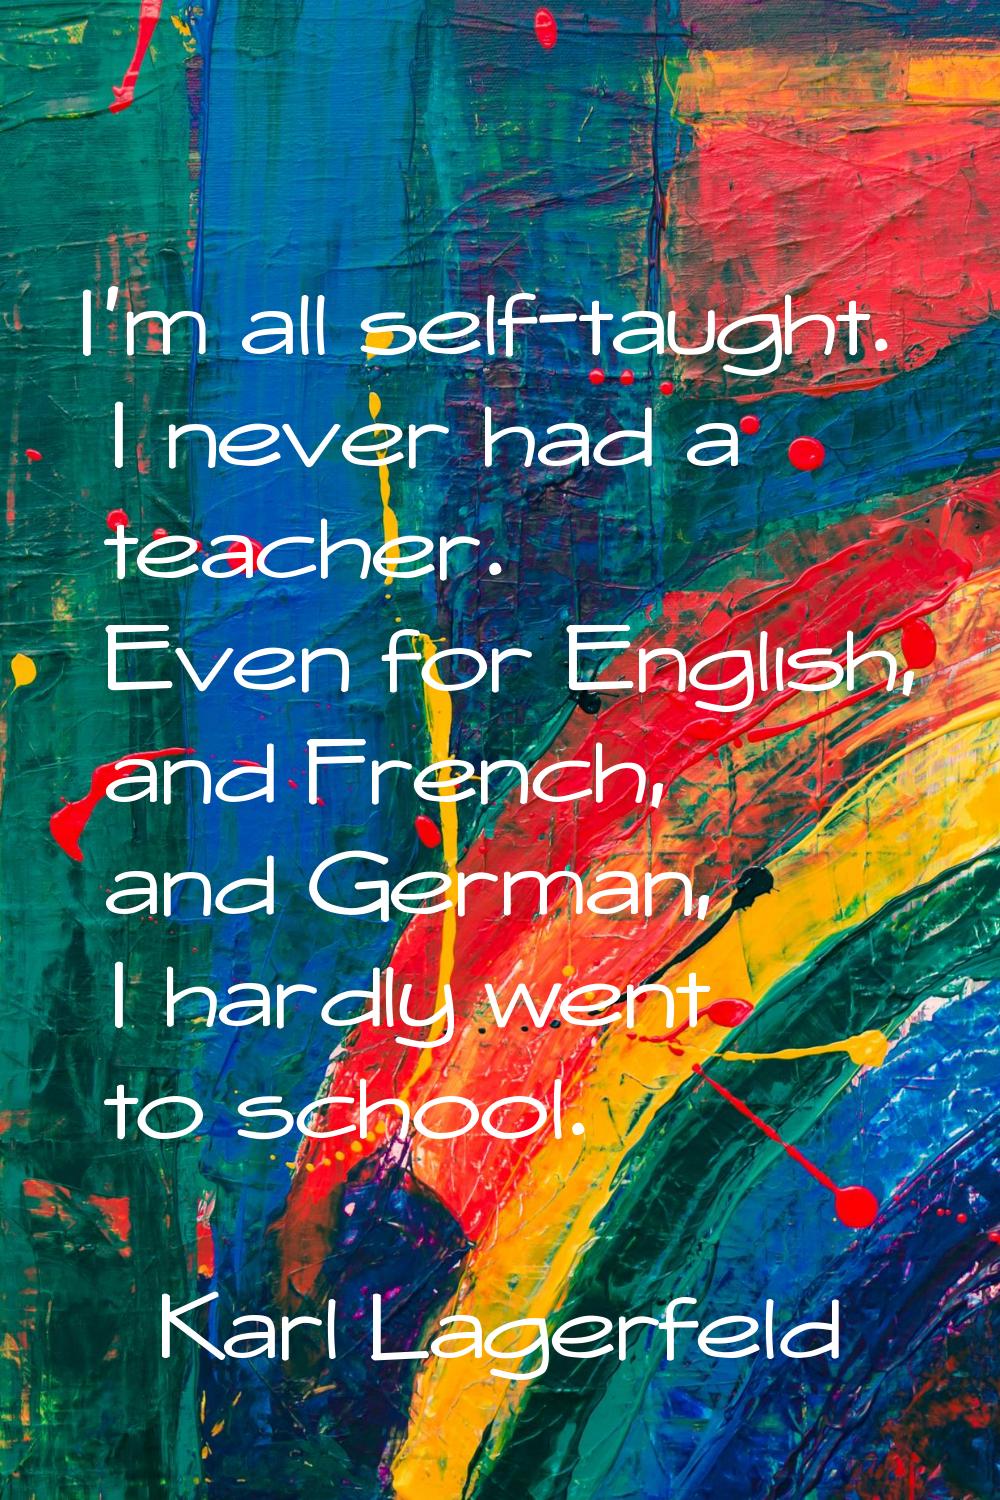 I'm all self-taught. I never had a teacher. Even for English, and French, and German, I hardly went